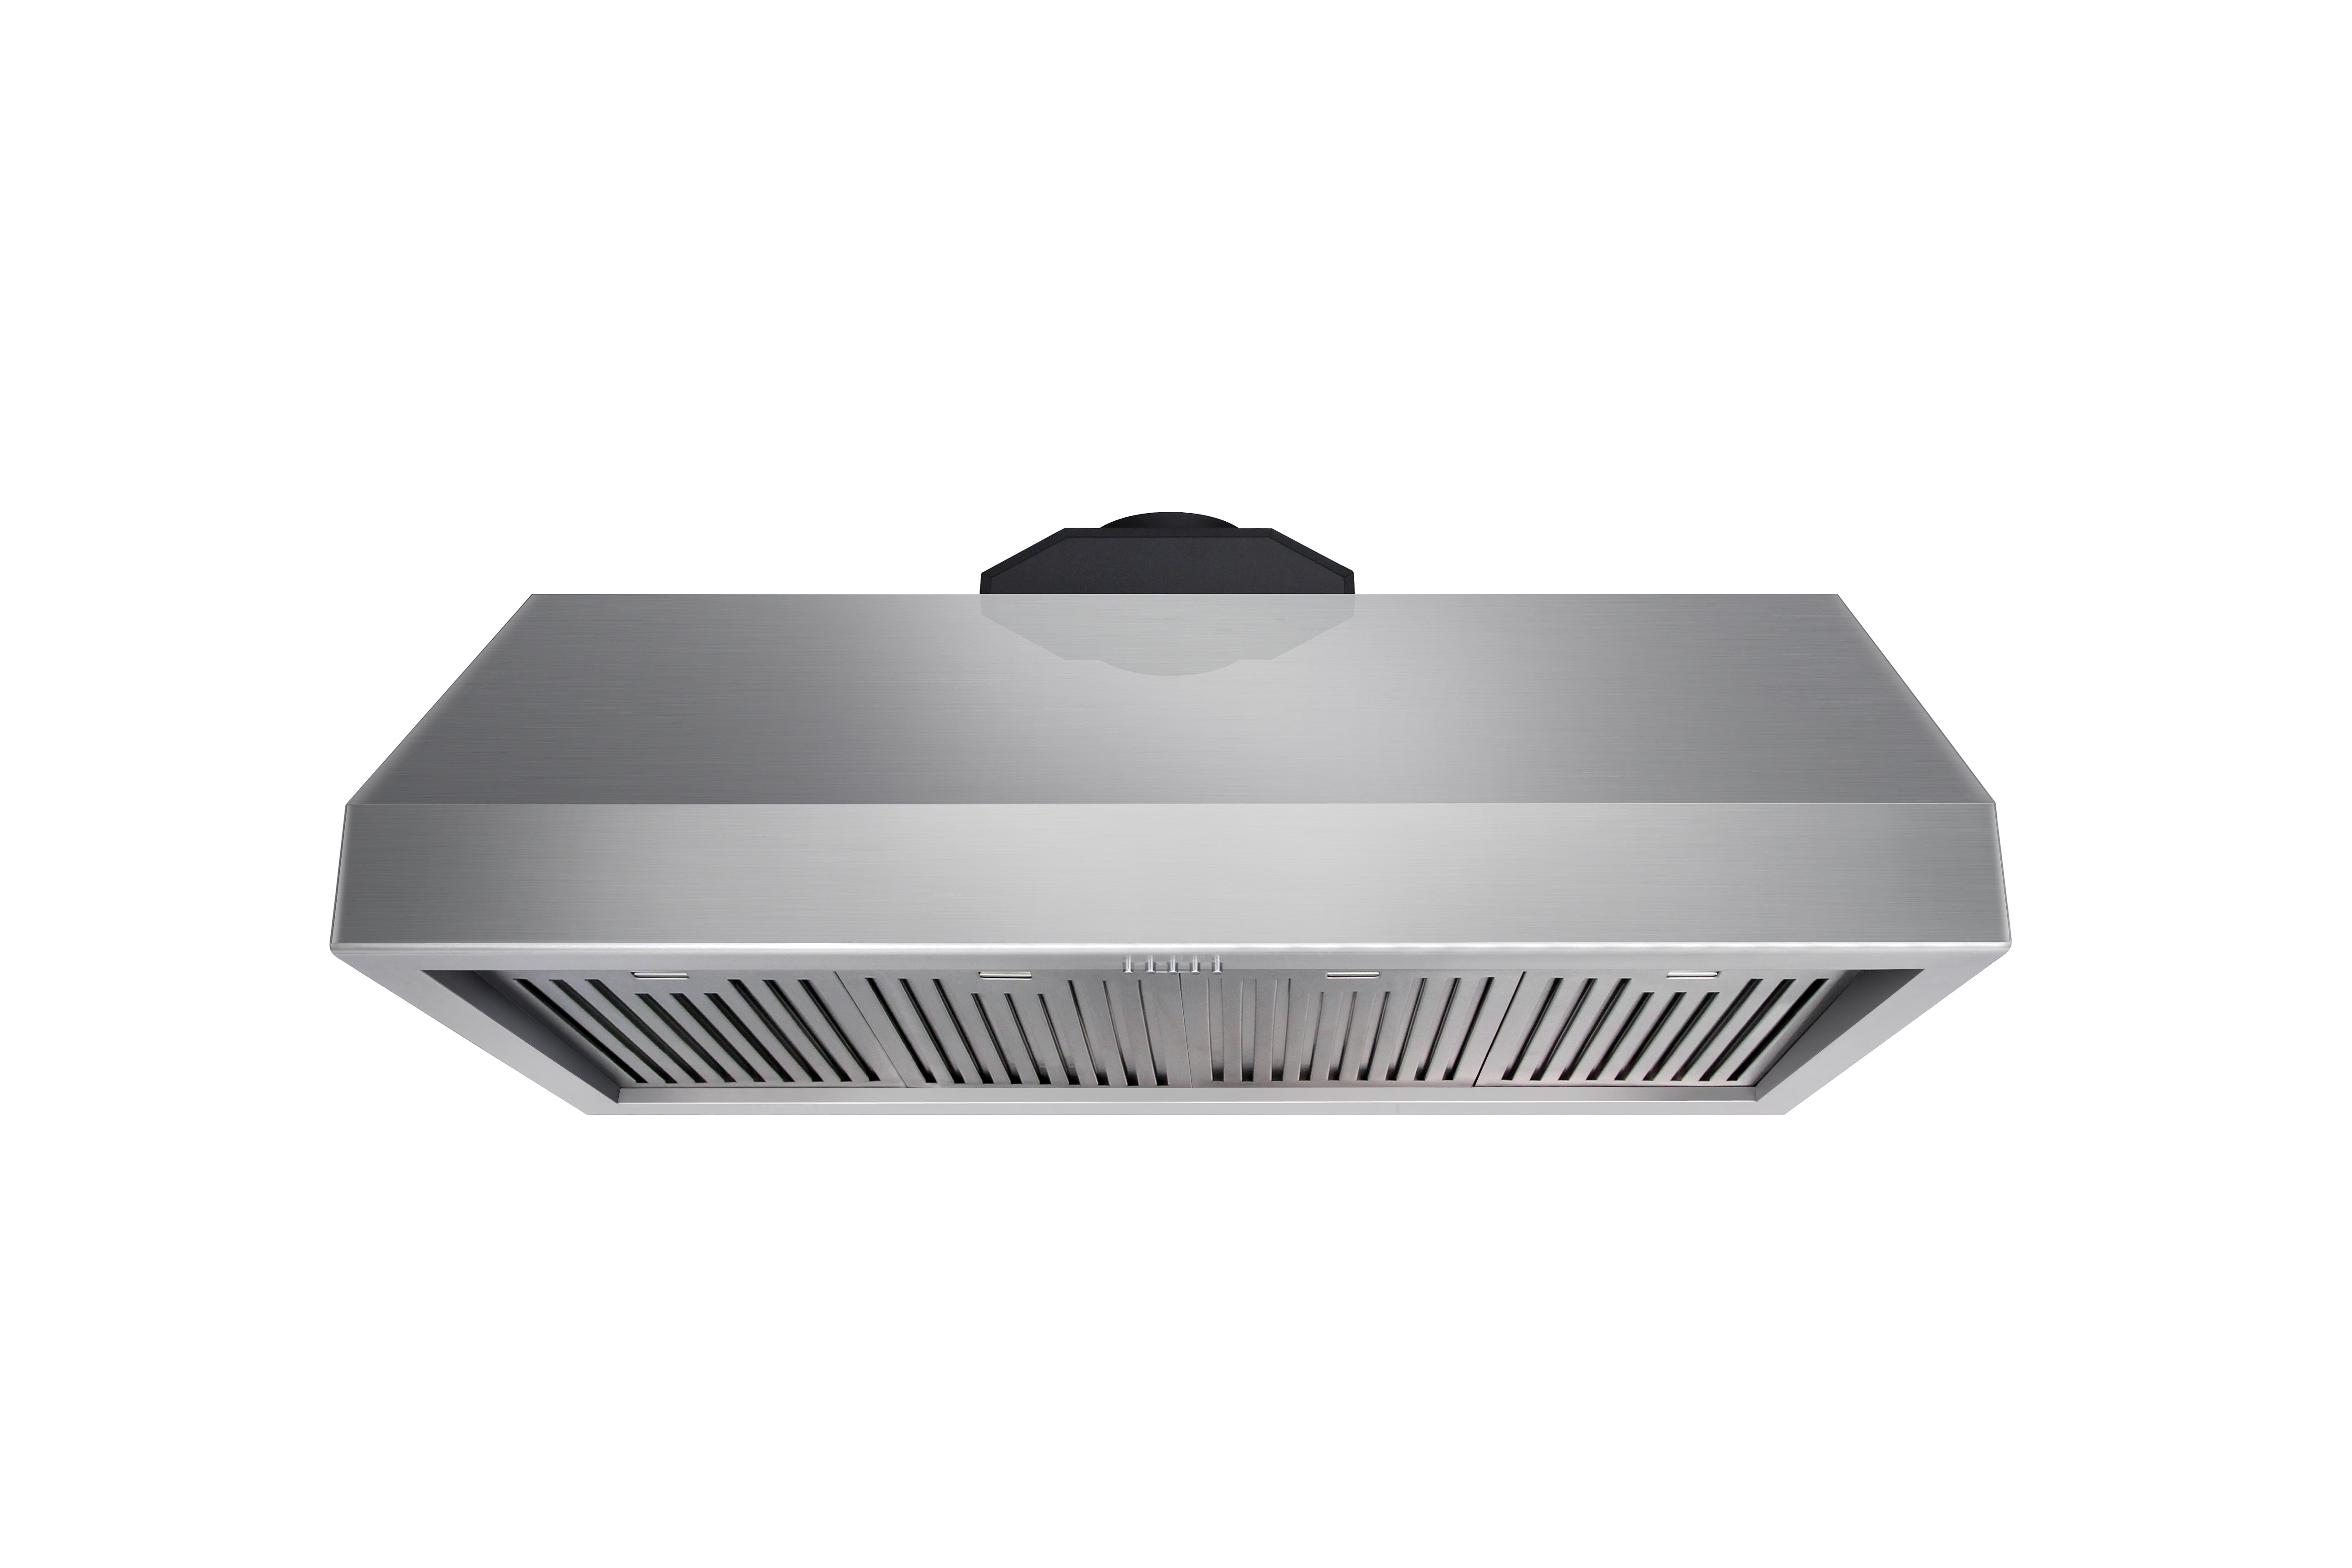 Thor Kitchen 48 Inch Professional Range Hood, 16.5 Inches Tall in Stainless Steel- Model TRH4805